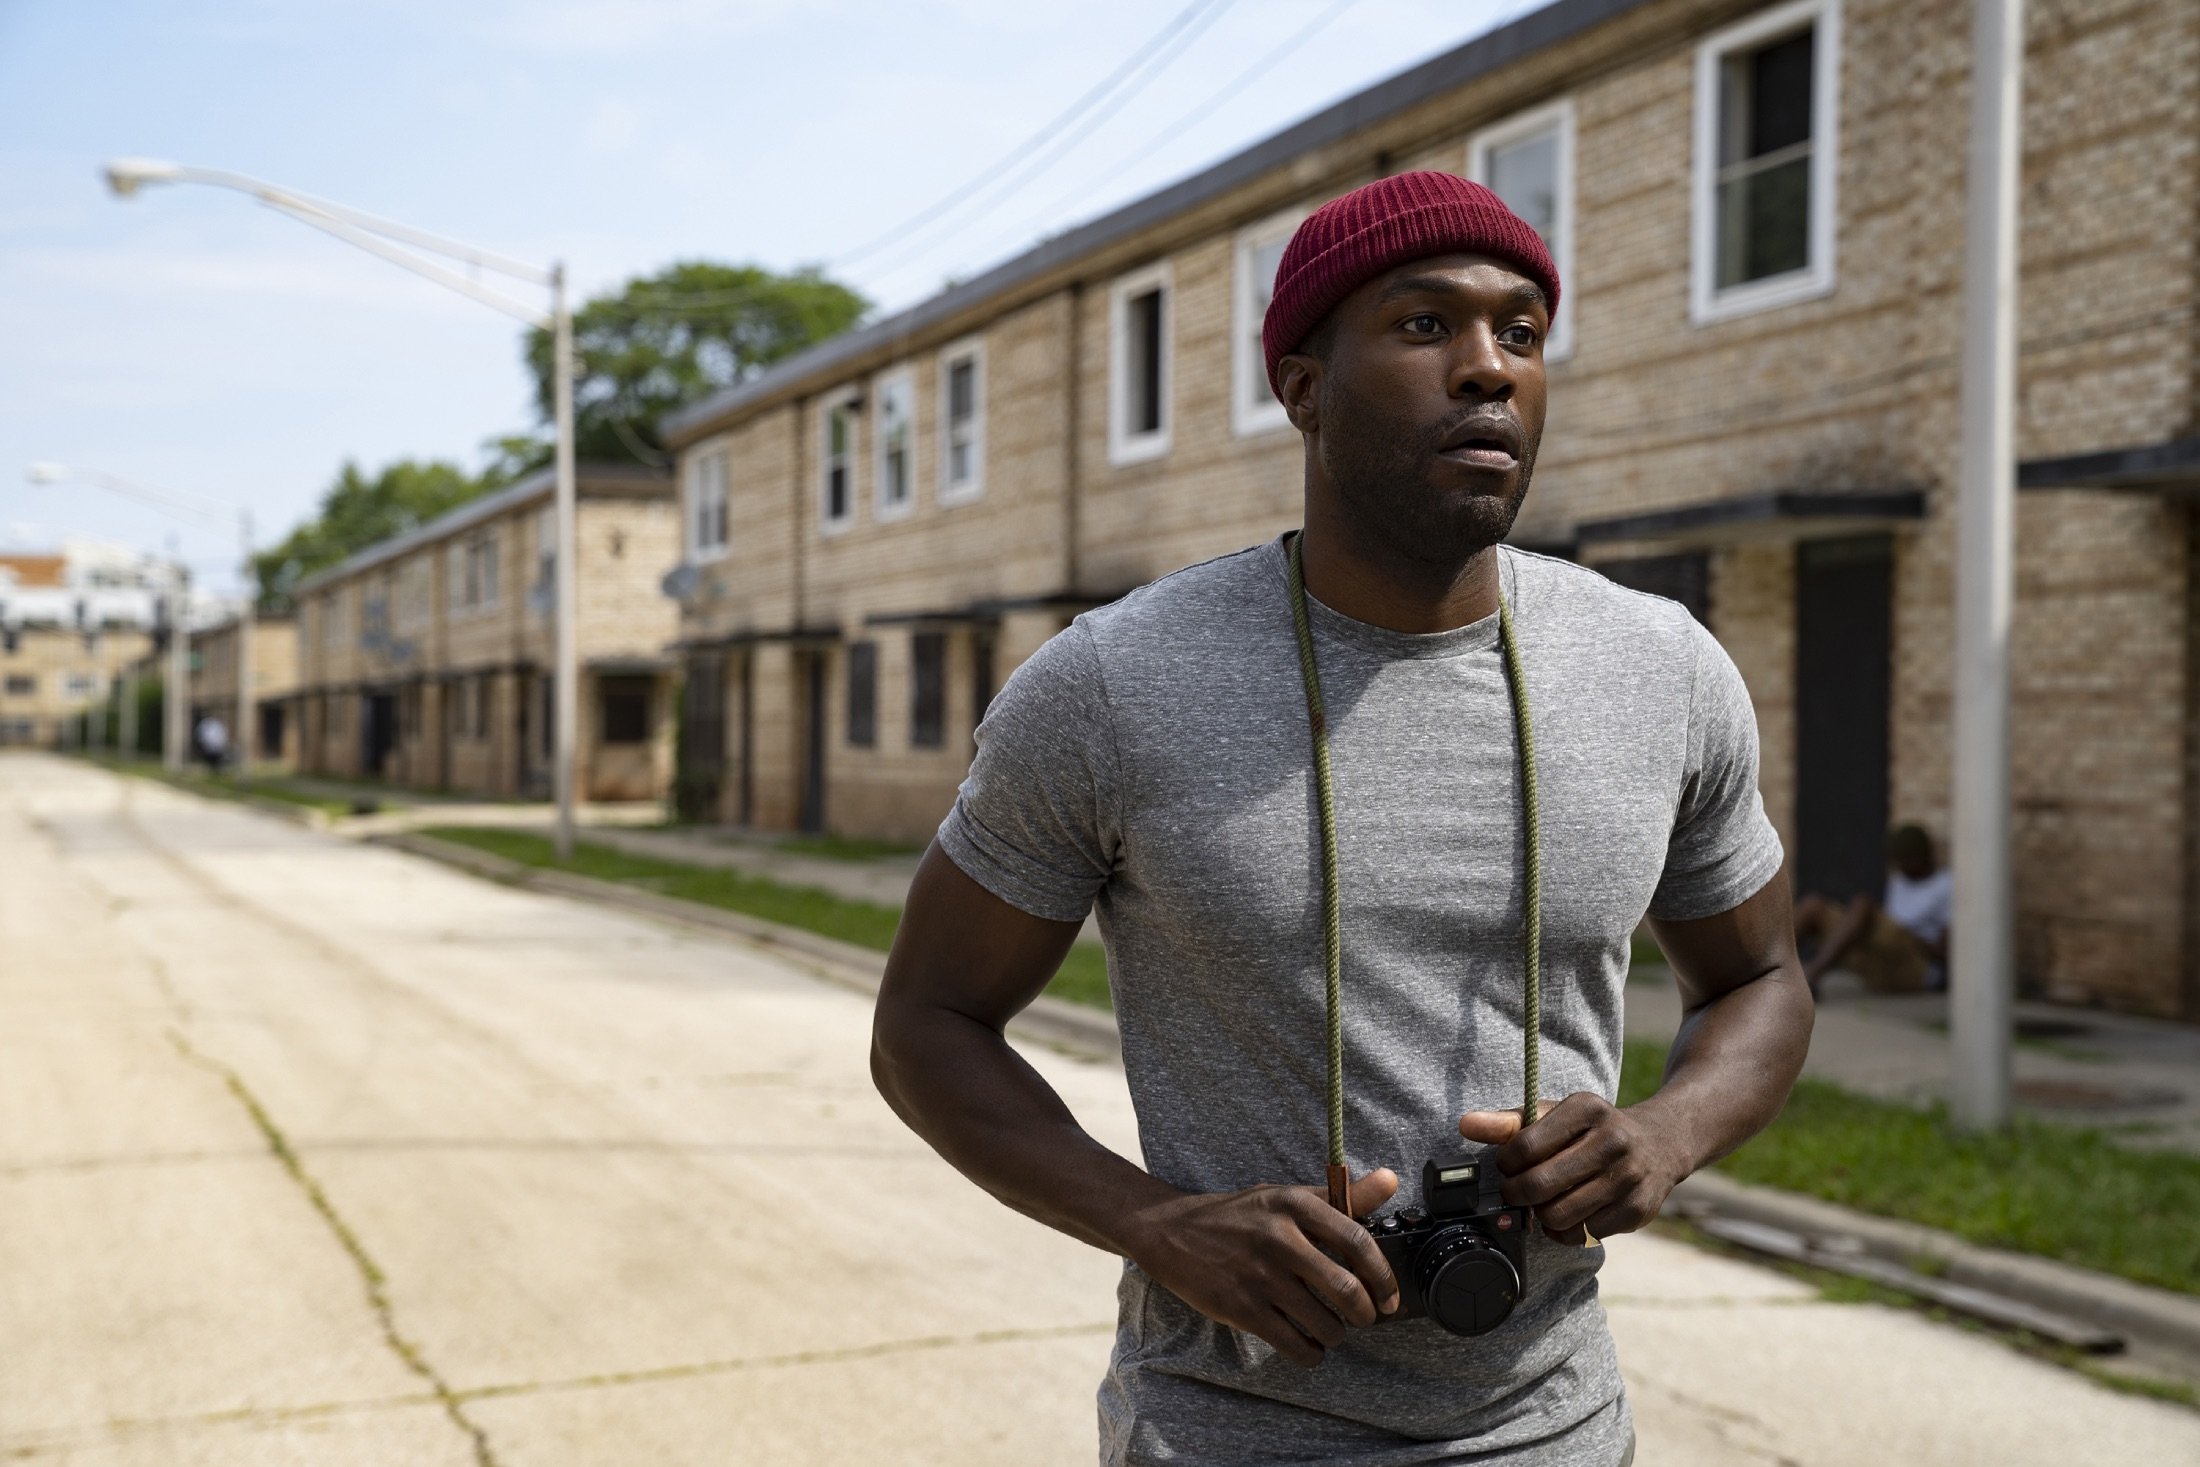 Yahya Abdul-Mateen II as Anthony McCoy, in a scene from the film “Candyman,” directed by Nia DaCosta. (AP Photo)